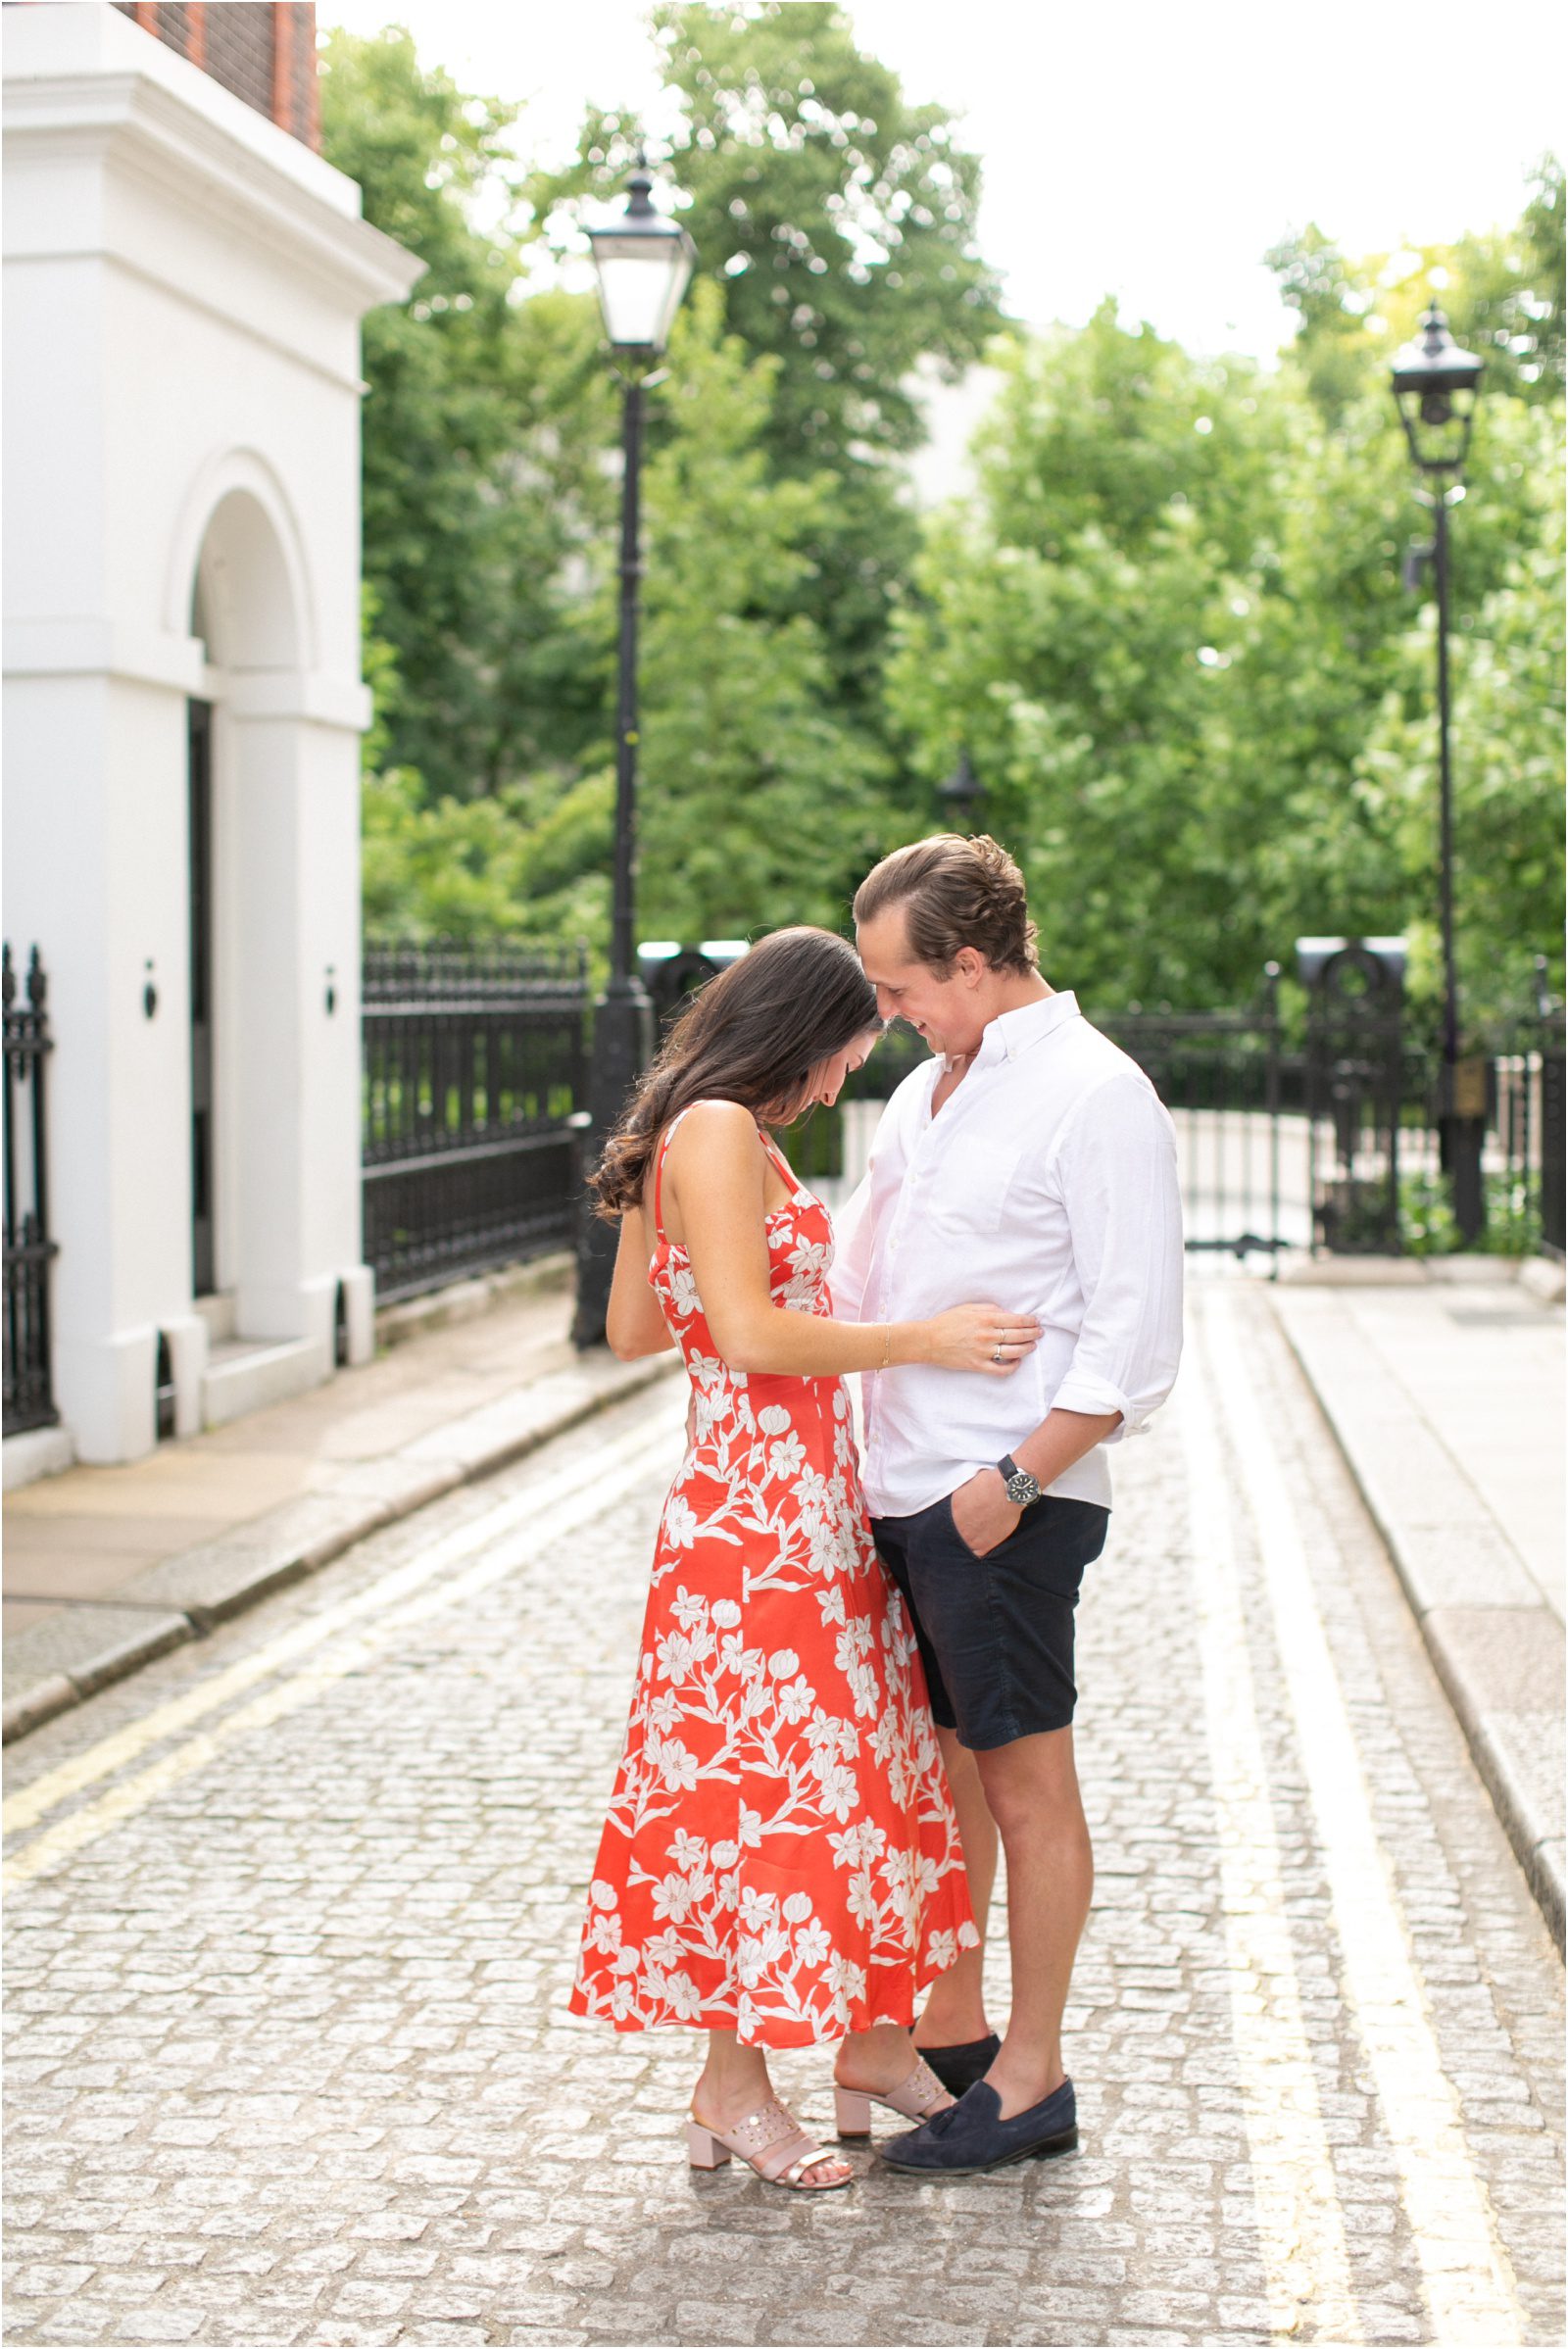 Cute London couple laughing during their engagement shoot